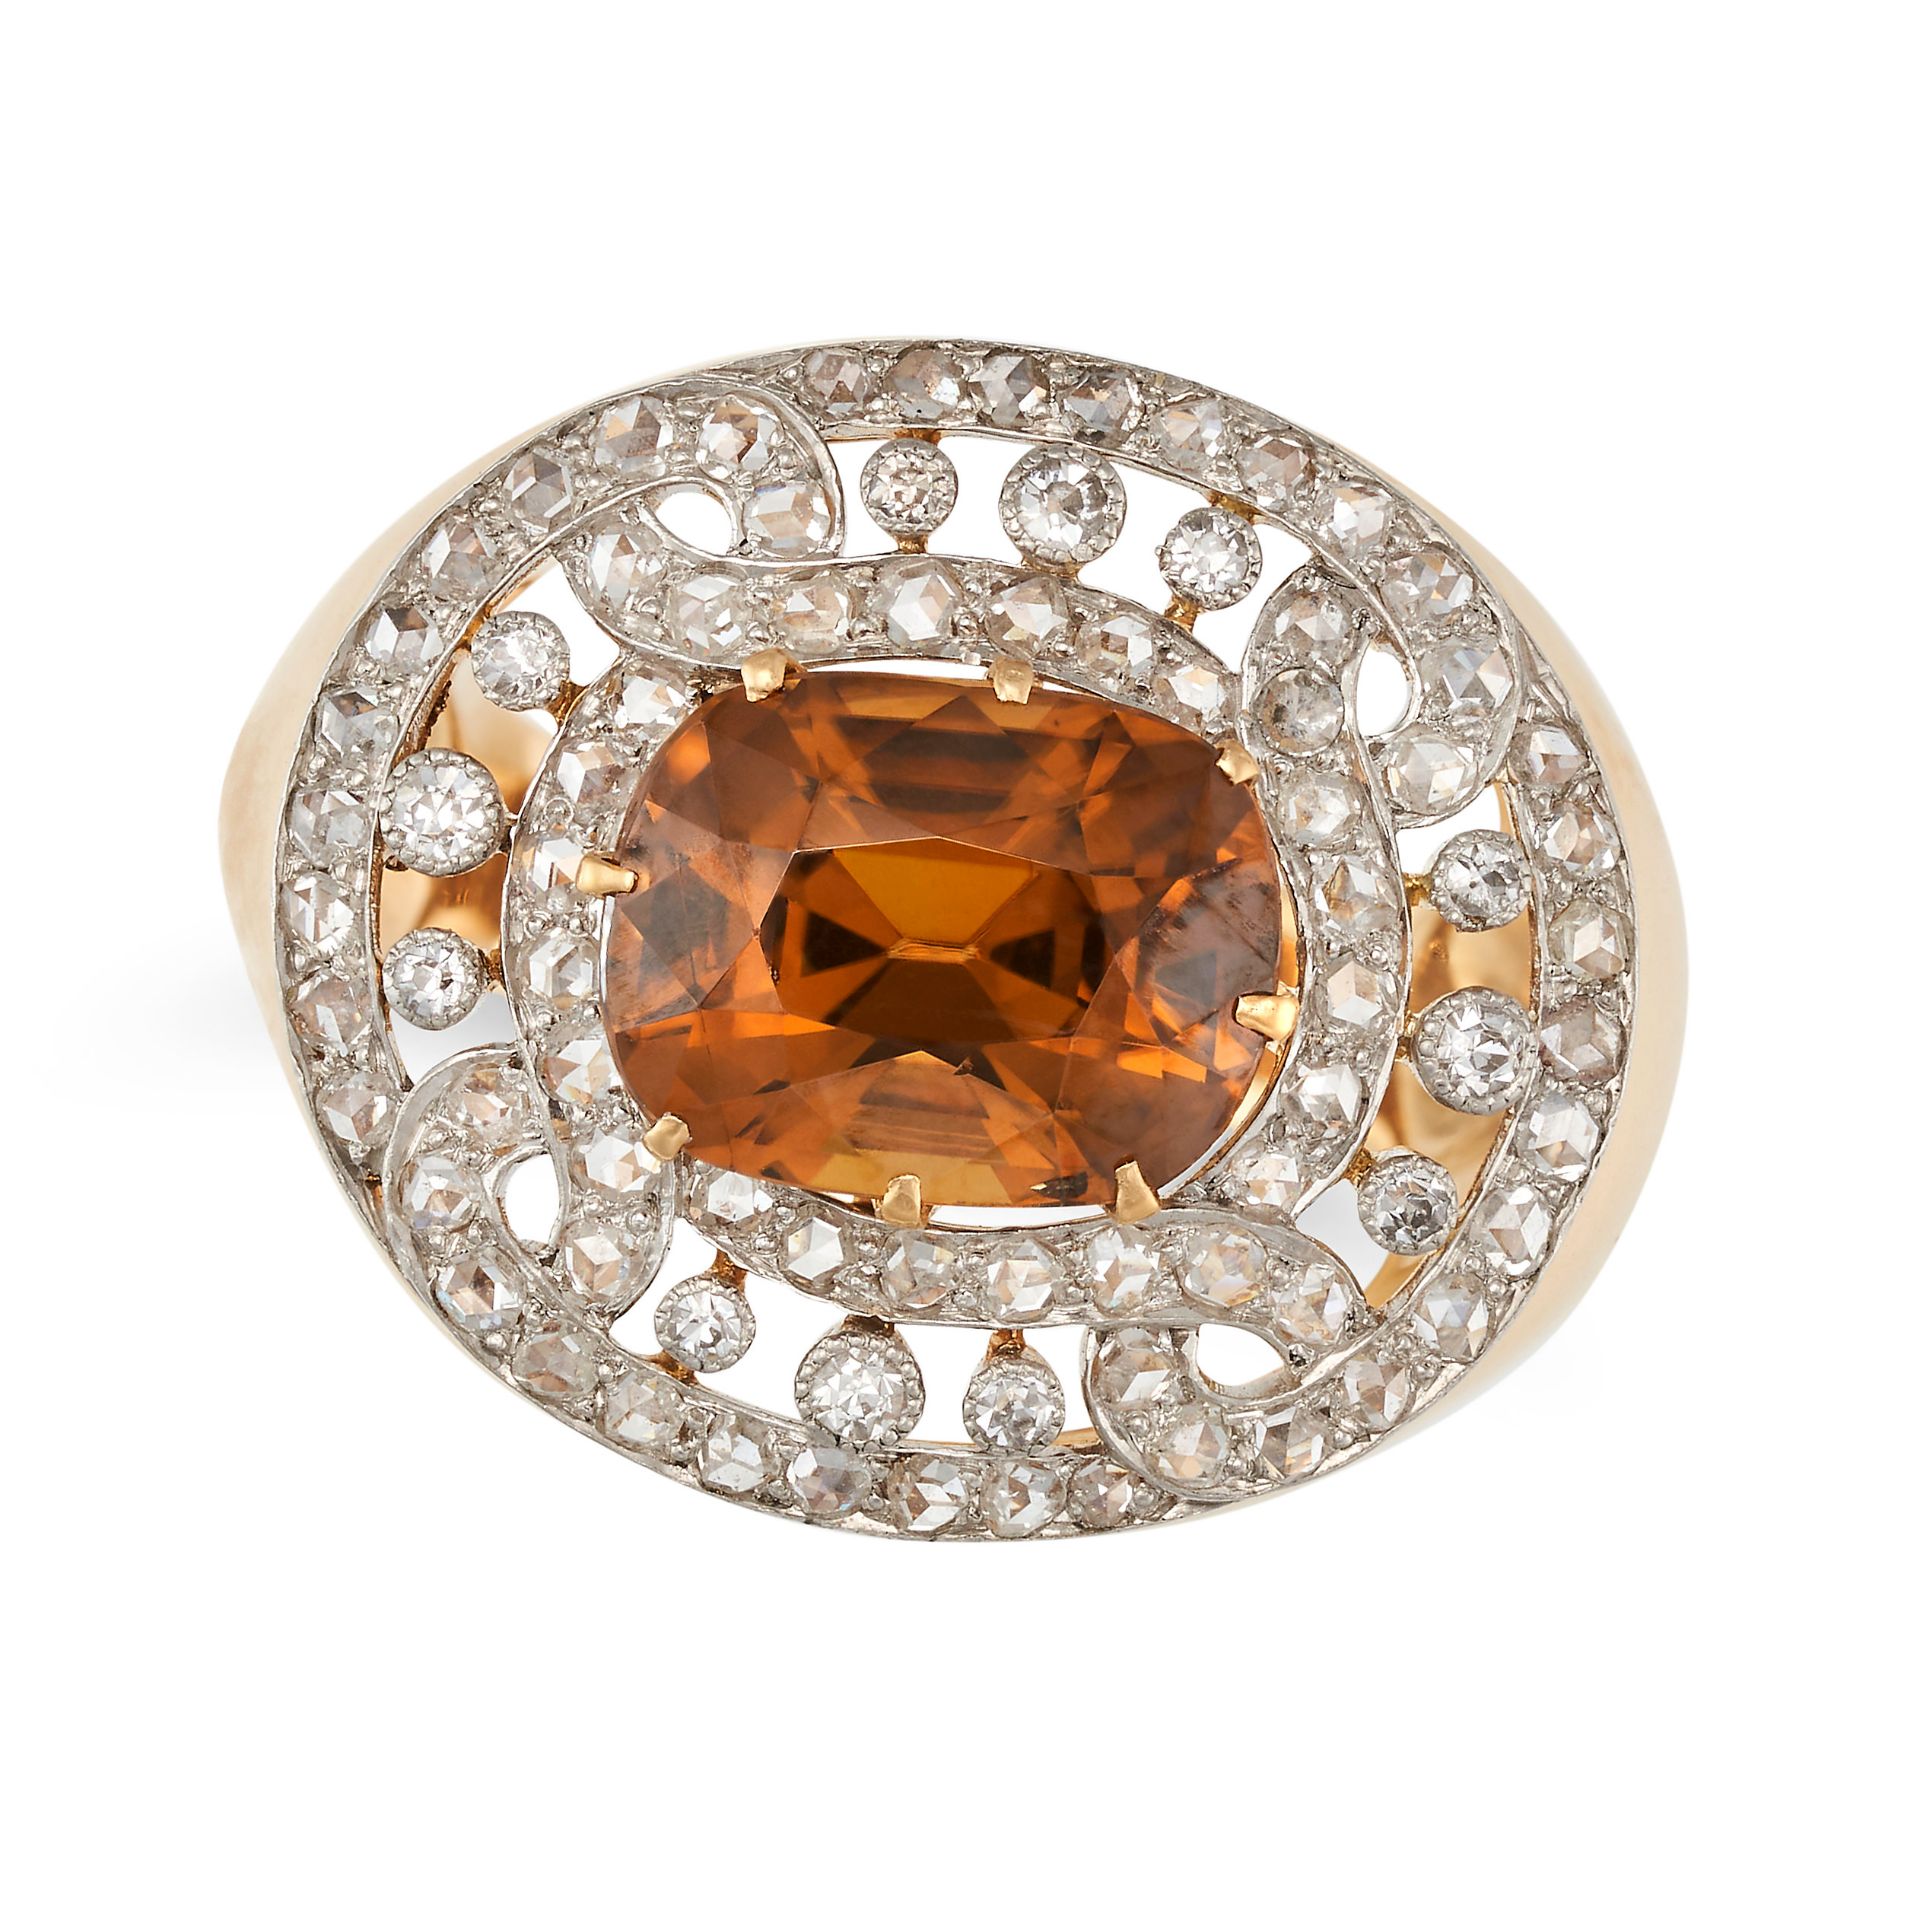 A GOLDEN ZIRCON AND DIAMOND DRESS RING in yellow gold, set with a cushion cut golden zircon in an...